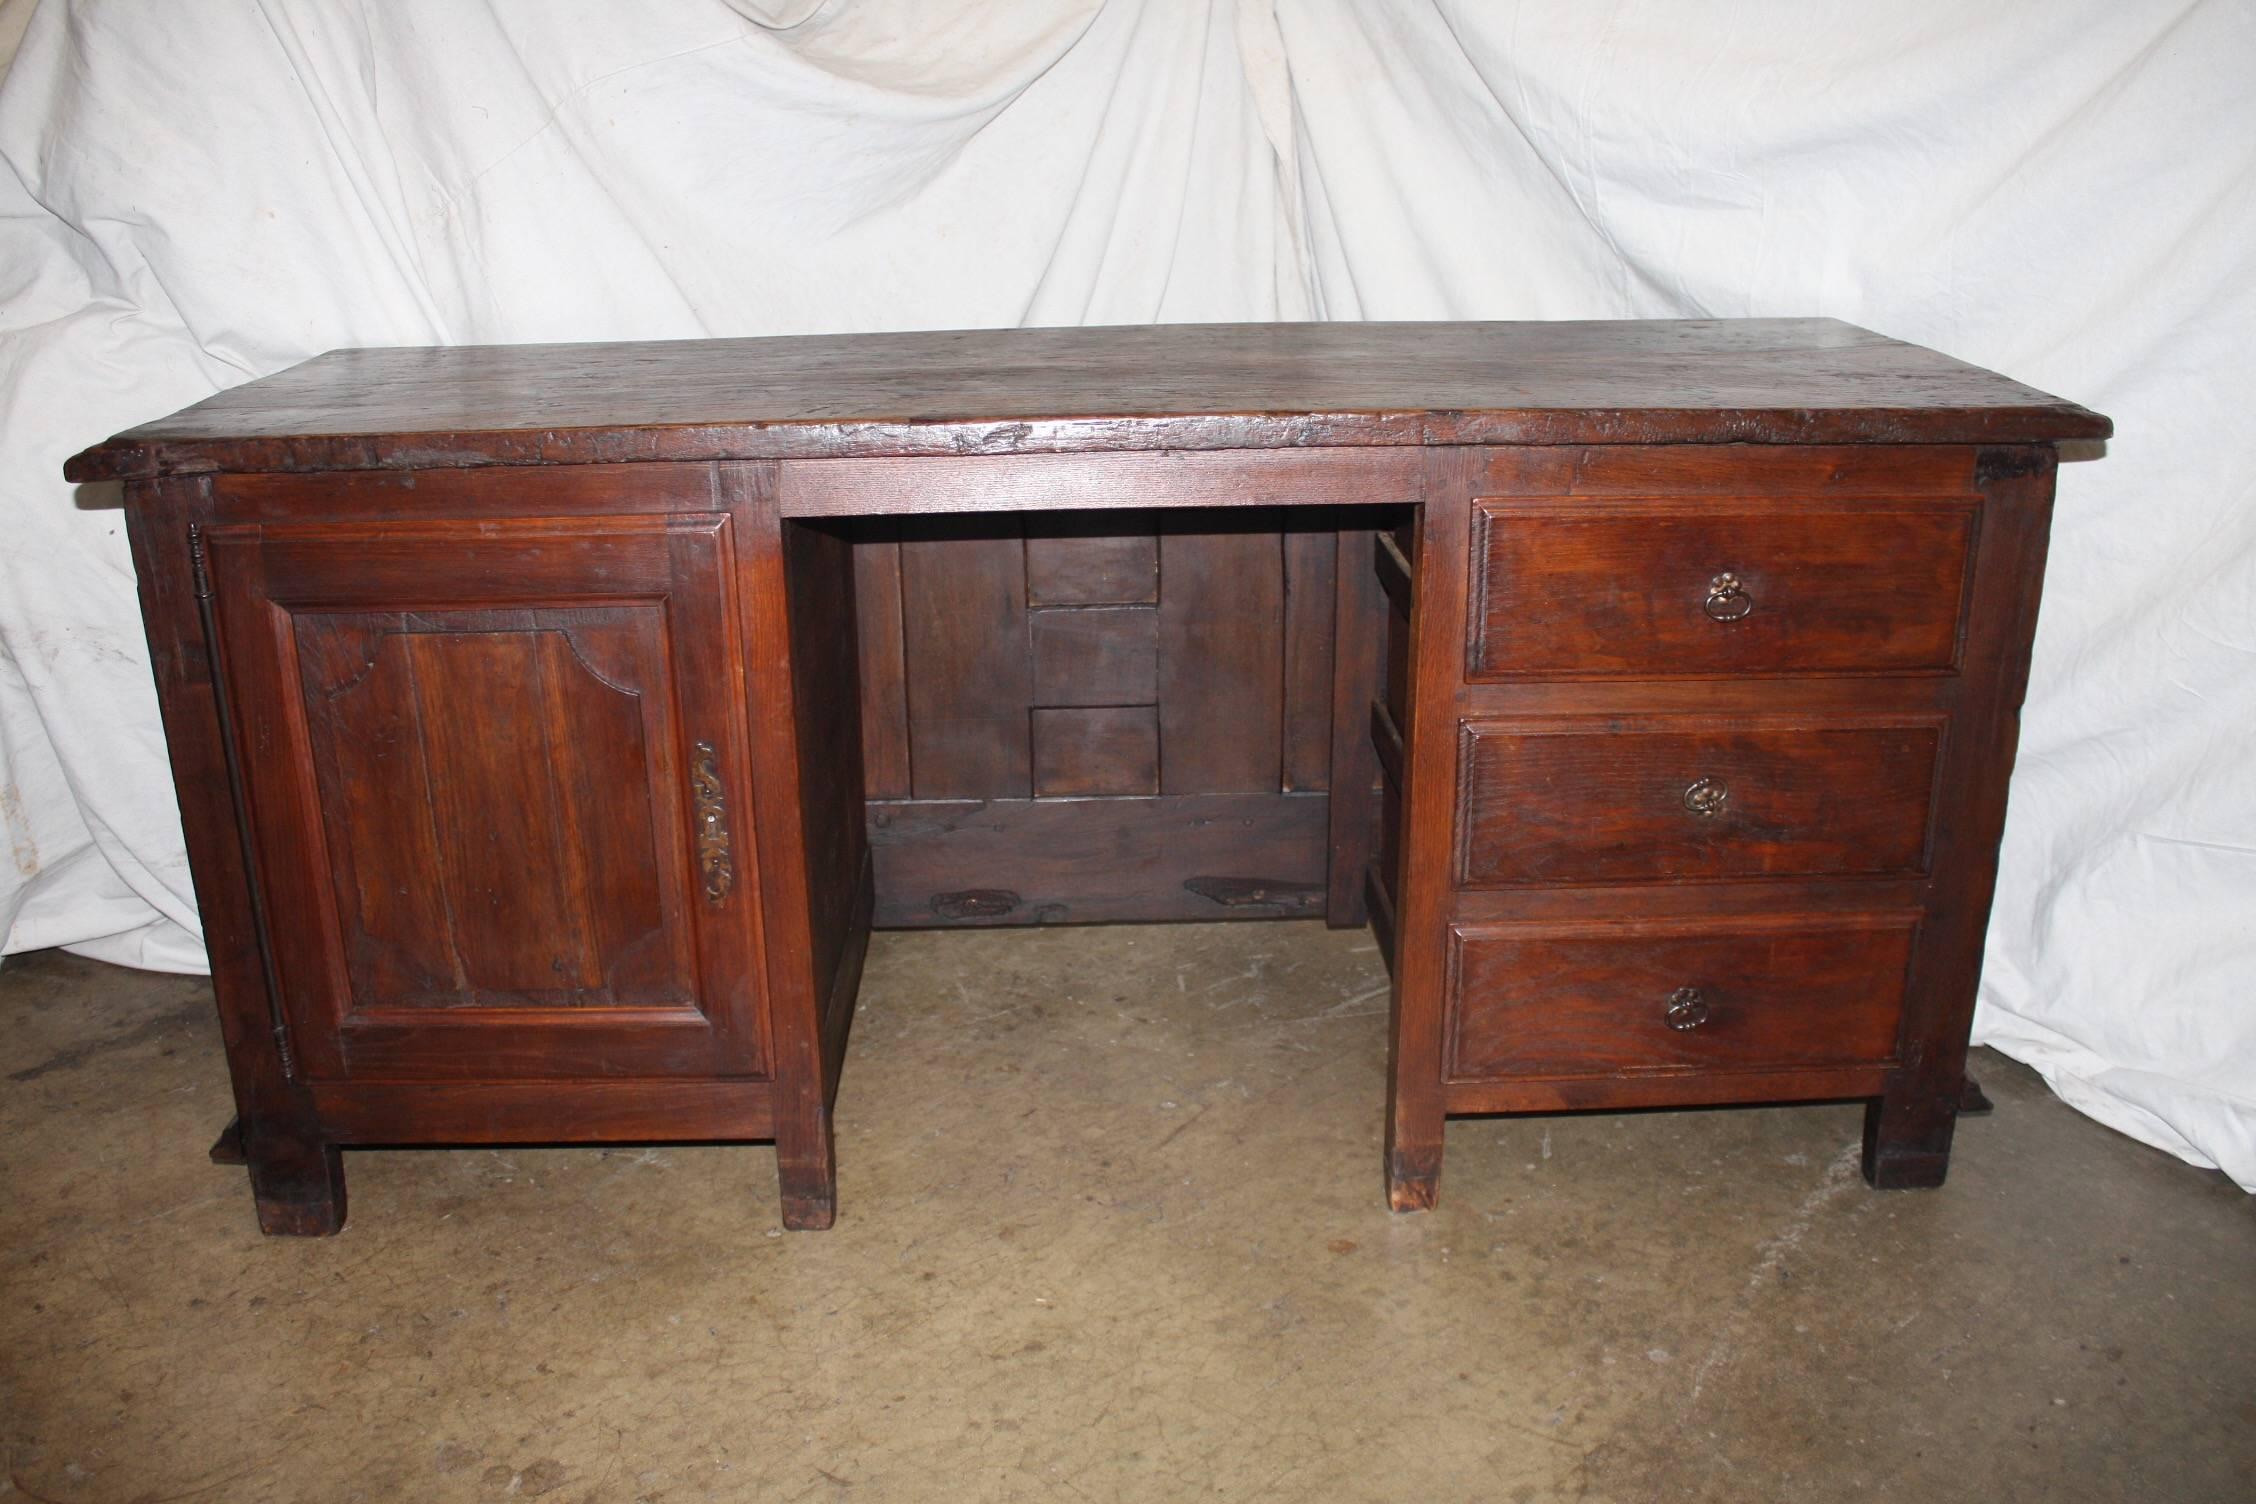 Louis XIV Magnificent 18th Century French Desk